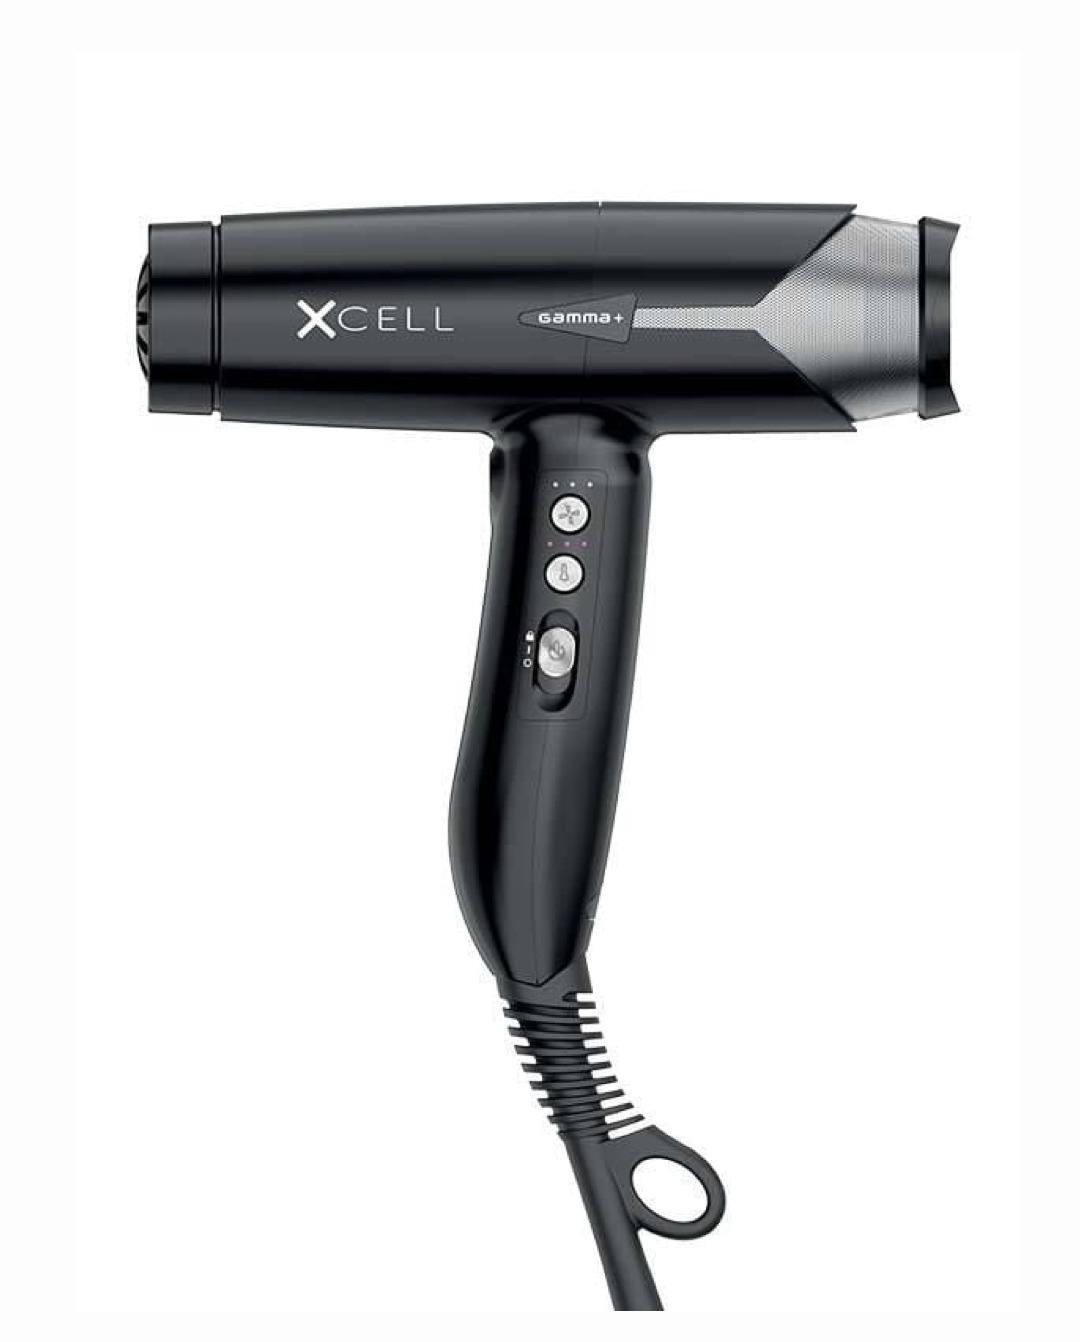 Gamma+ Xcell Ionic Technology Hair Dryer The Xcell dryer changes everything - the world’s first truly professional high-tech hair dryer features 30% more air pressure than other dryers in its class with intelligent heat control to prevent damaging hair. Acoustic noise optimization reduces the decibel level with a softer and gentler pitch. Ultra-lightweight design is only 10.4 oz – making the Xcell the ultimate drying machine.